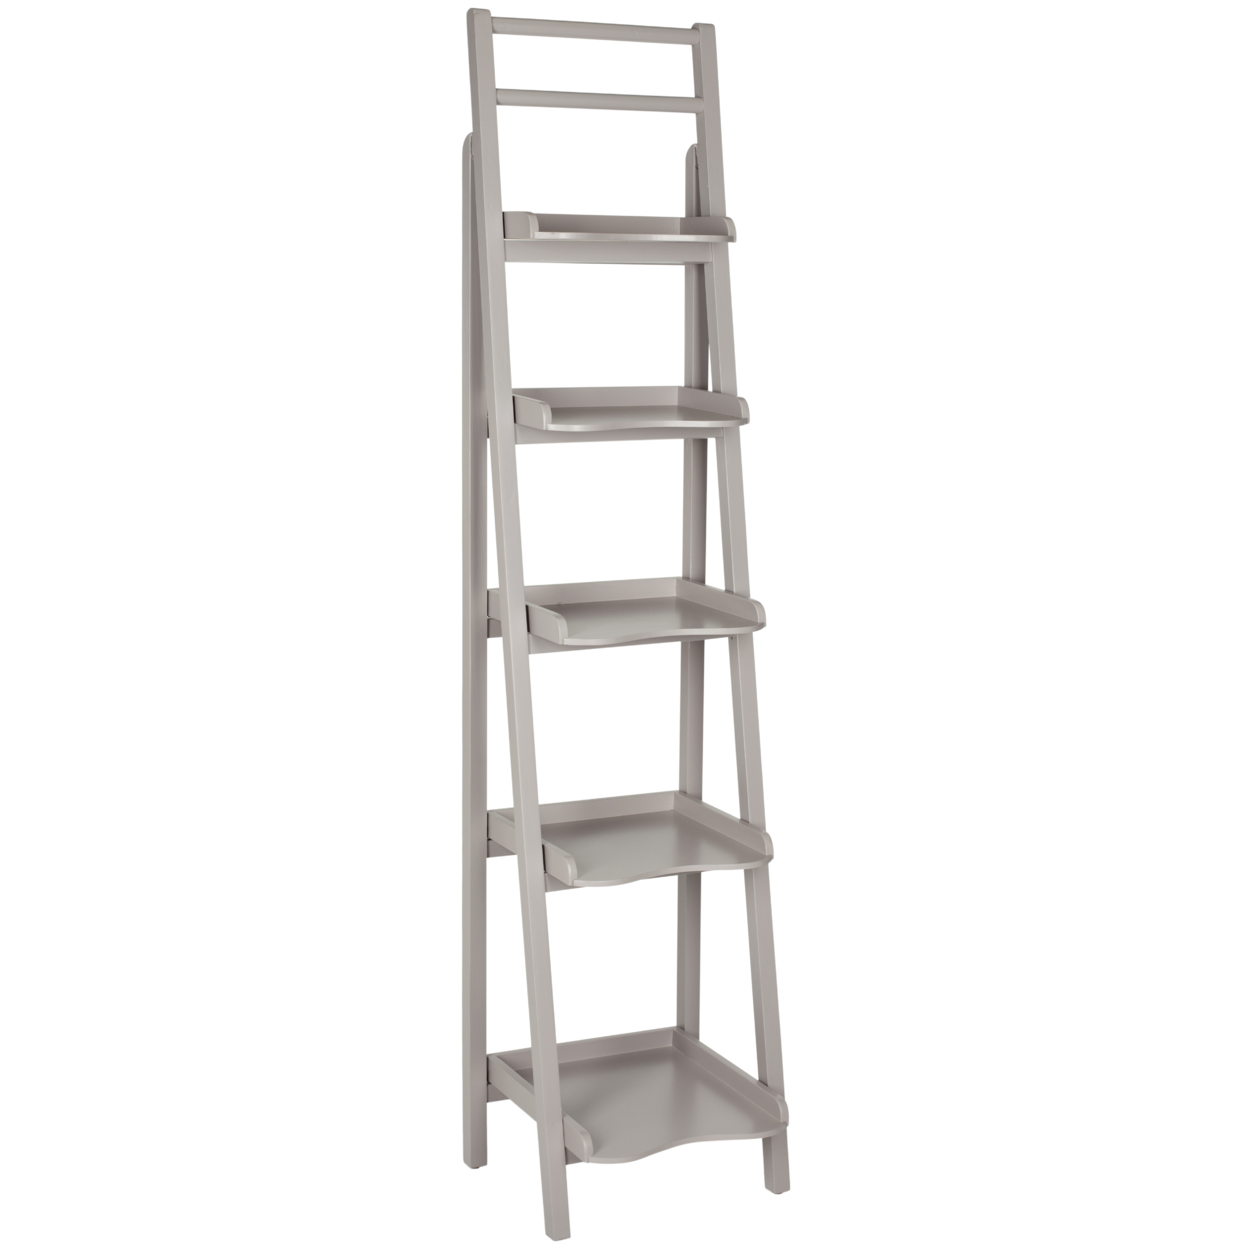 SAFAVIEH Asher Leaning 5-Tier Etagere Grey